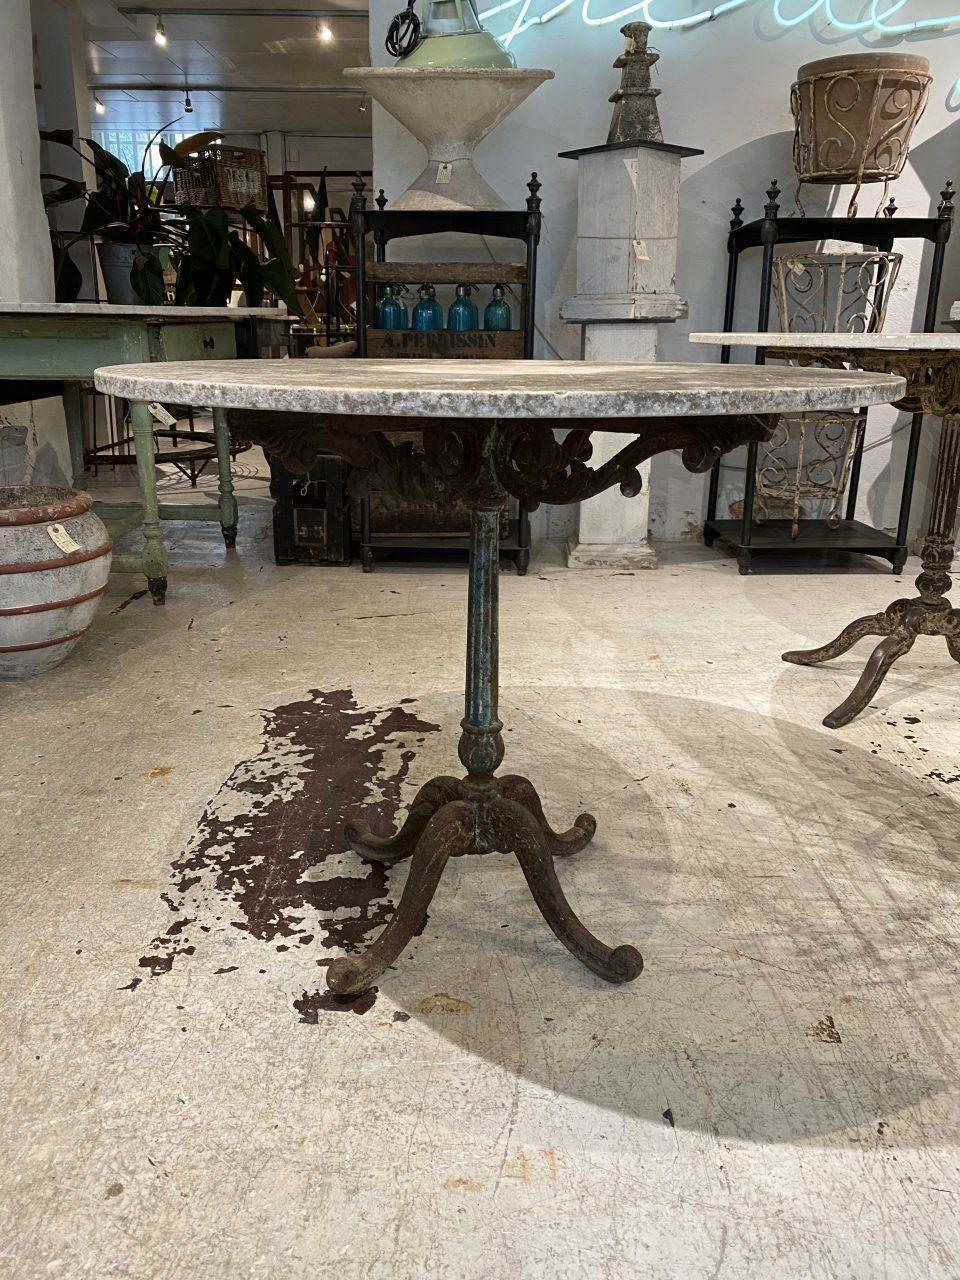 Elegant vintage French garden table with beautifully twisted base and legs, designed in blue-green patinated wrought iron with a rustic look. The table has a nice big solid circular grey marble top with nice weathered patina and easily seats 4 for a